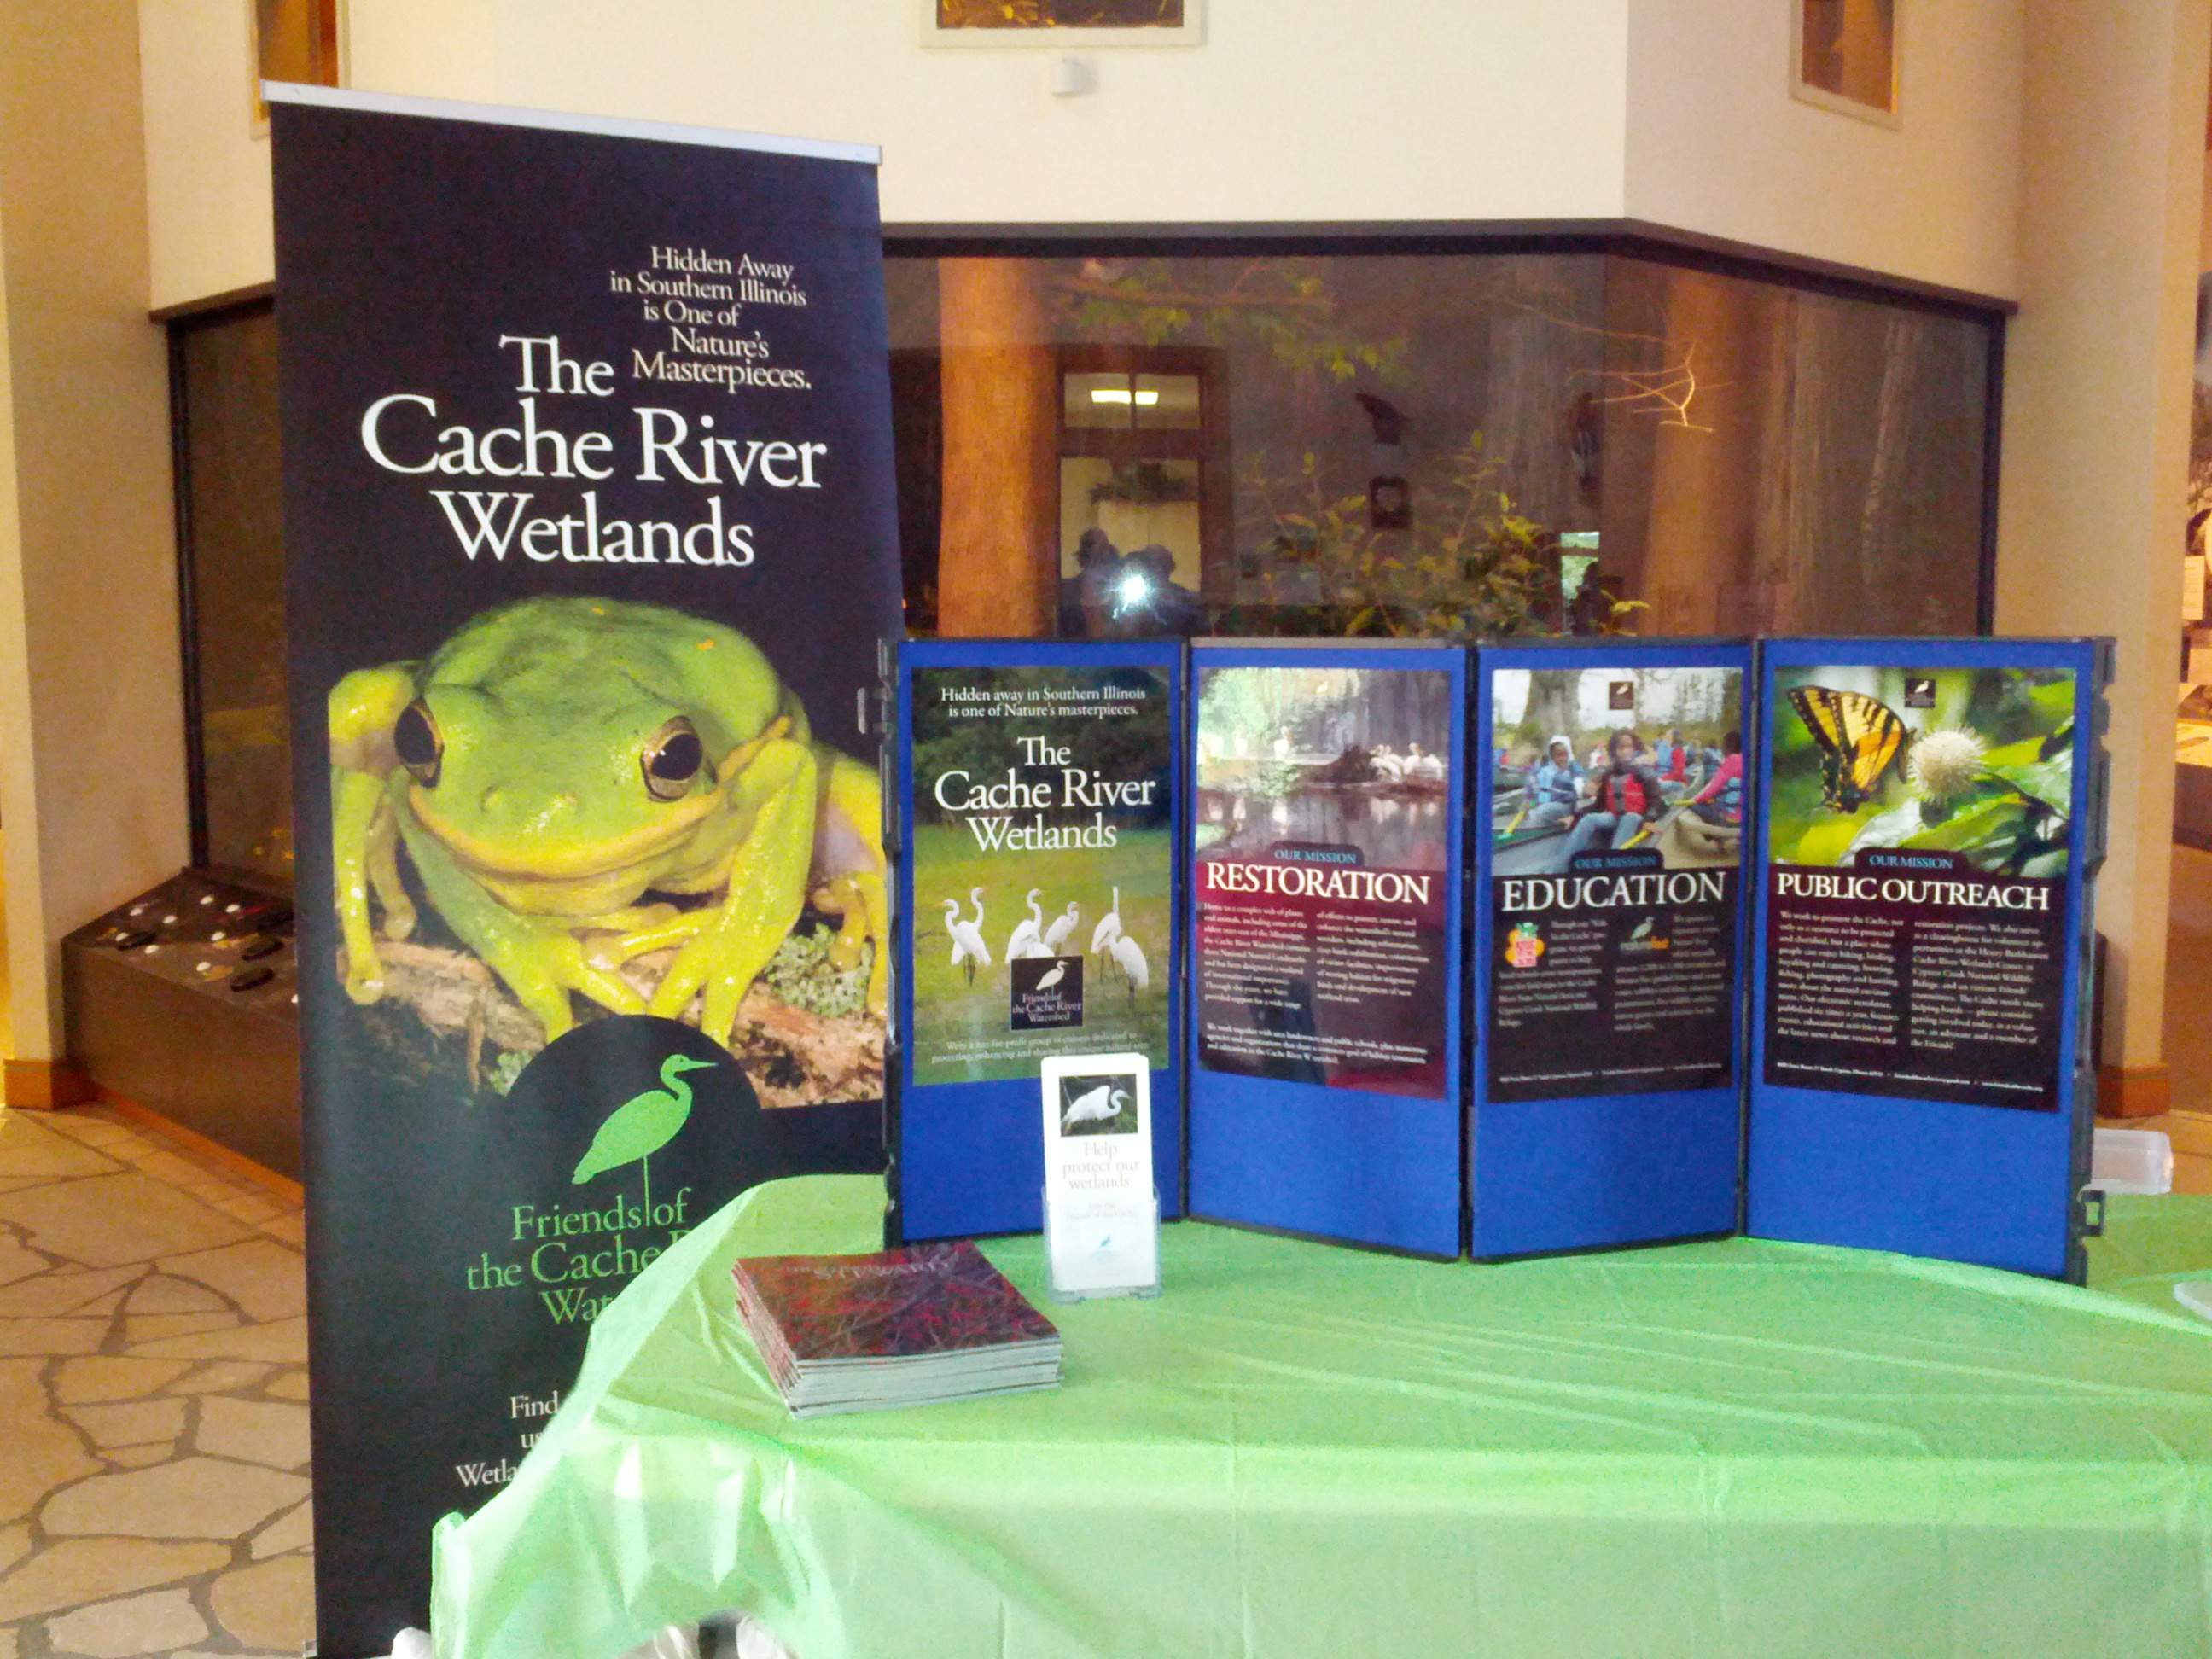 Information displays in the information center at the Cache River Wetlands